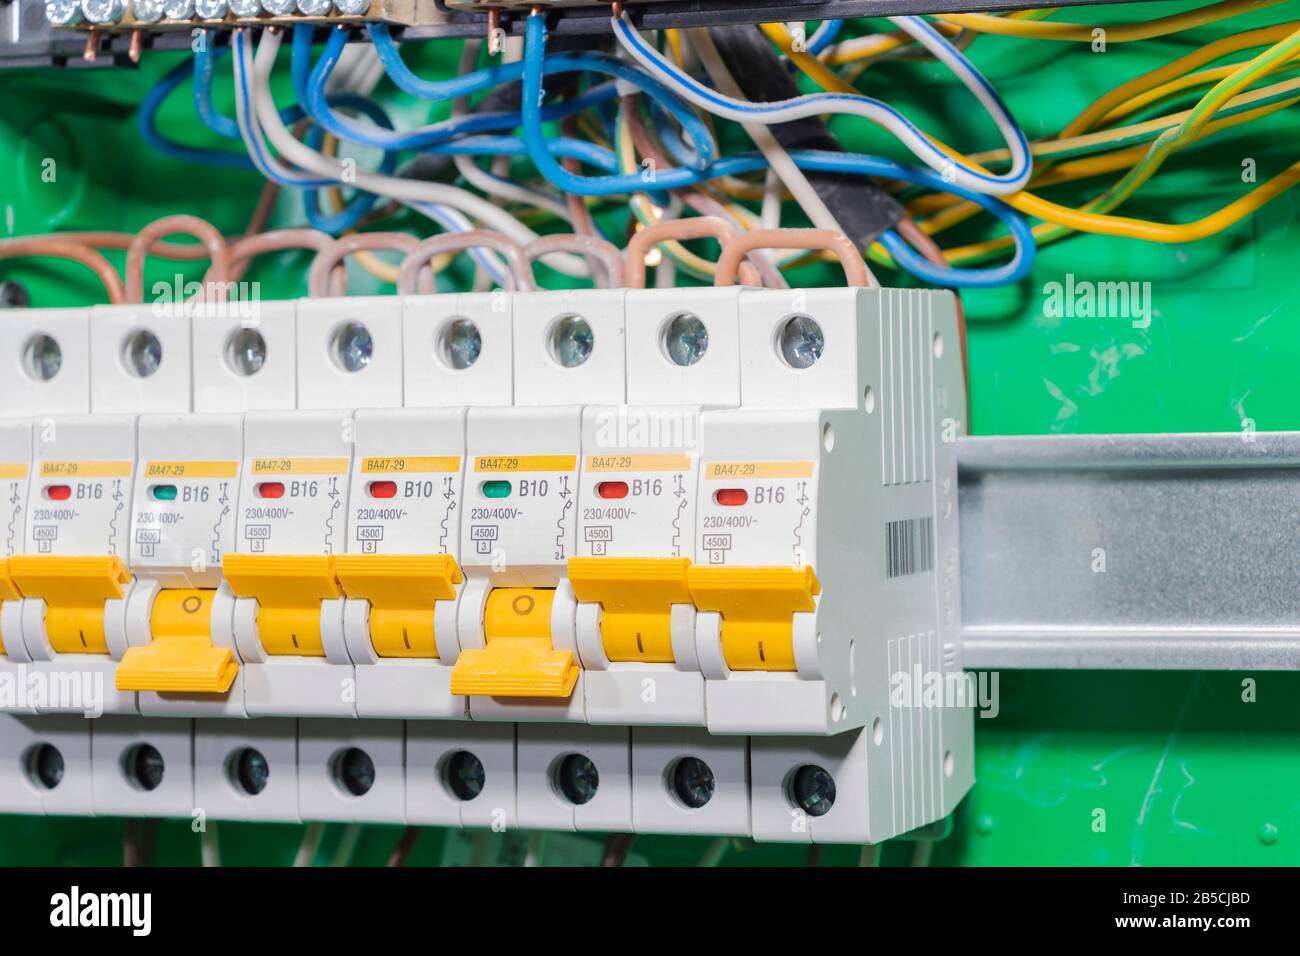 Automatic overload protection devices in the power supply network. Circuit breakers or fuses are an electrical safety device. Stock Photo